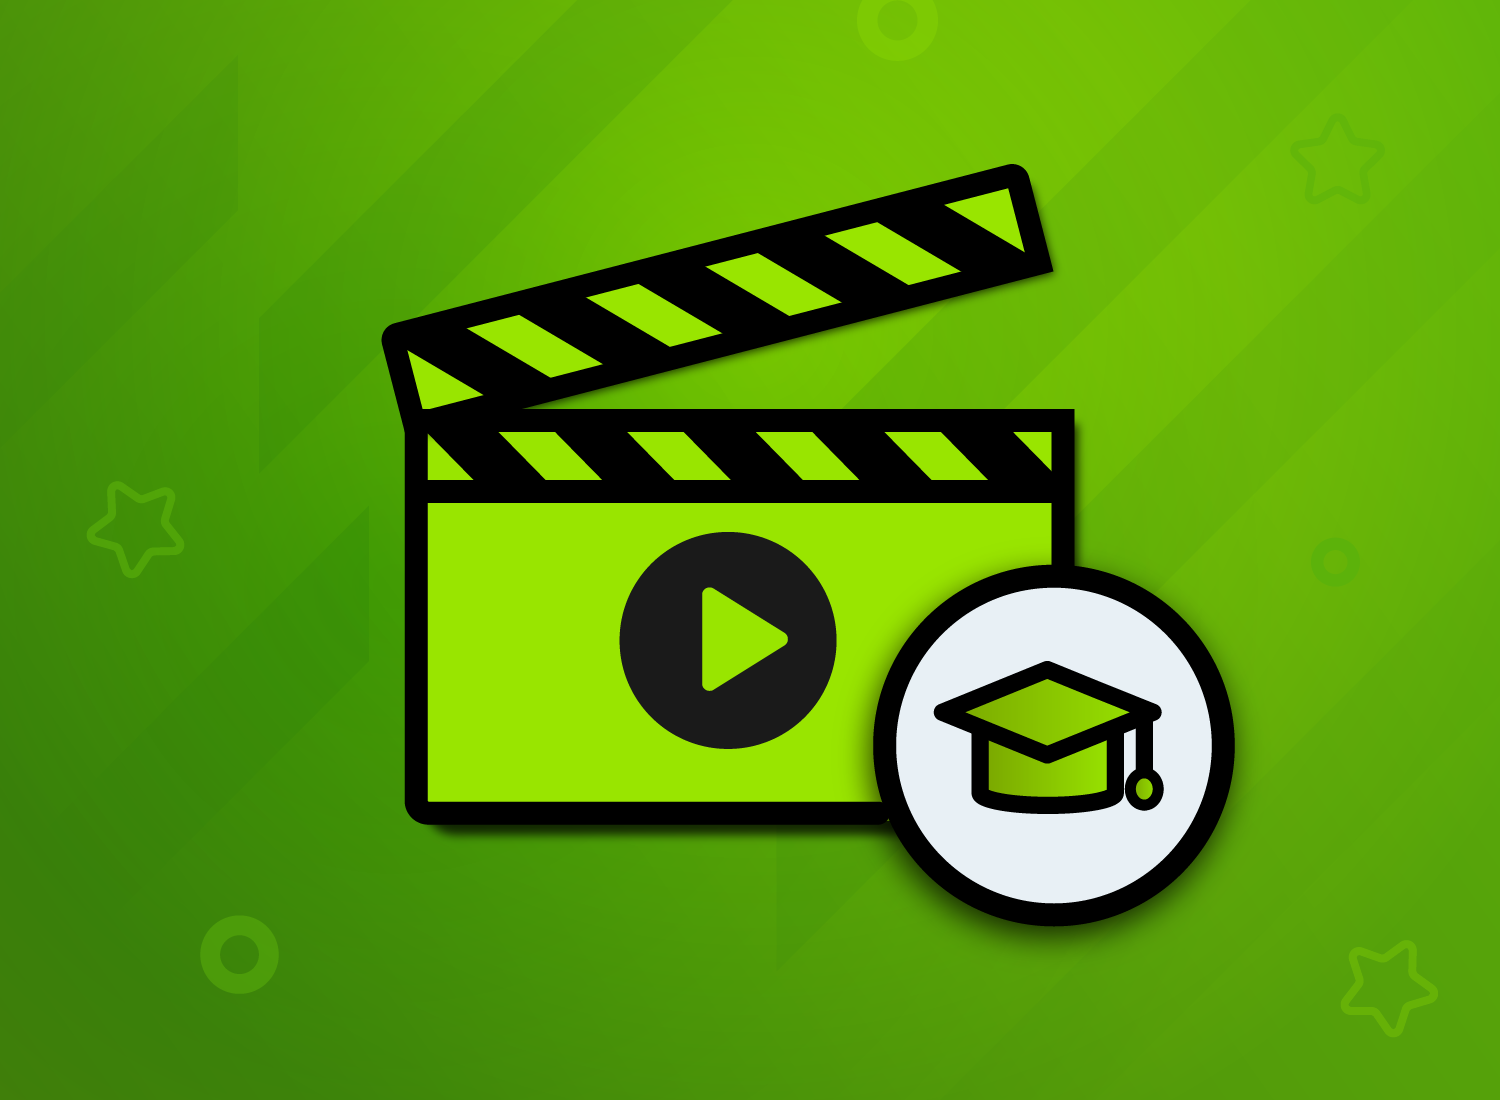 How to Make Great Training Videos? | The TechSmith Blog